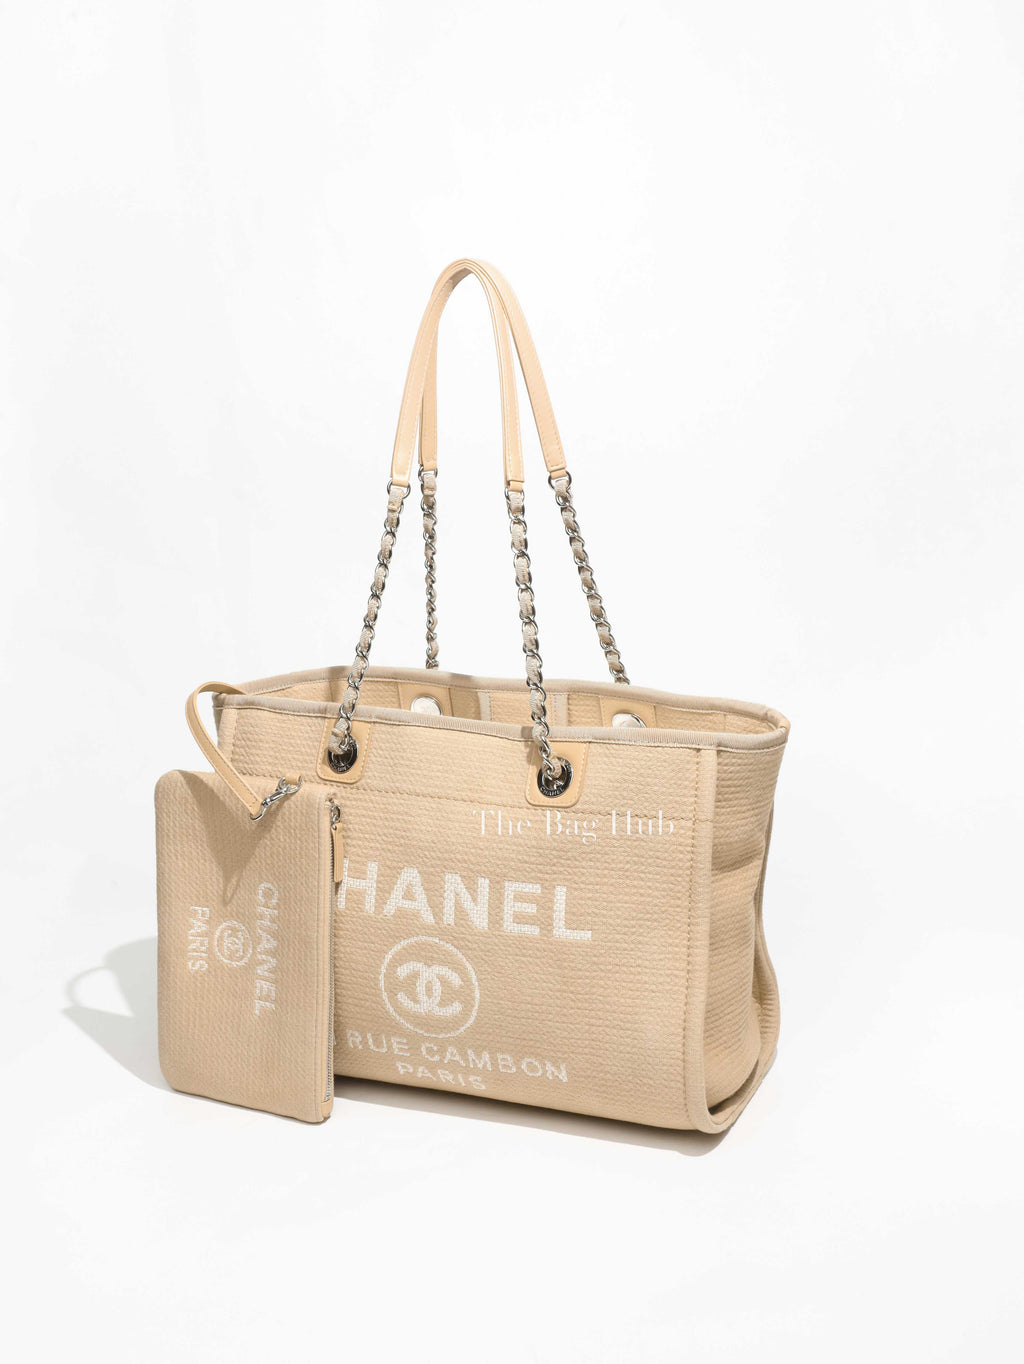 Chanel Beige Fabric Small Deauville Tote Bag